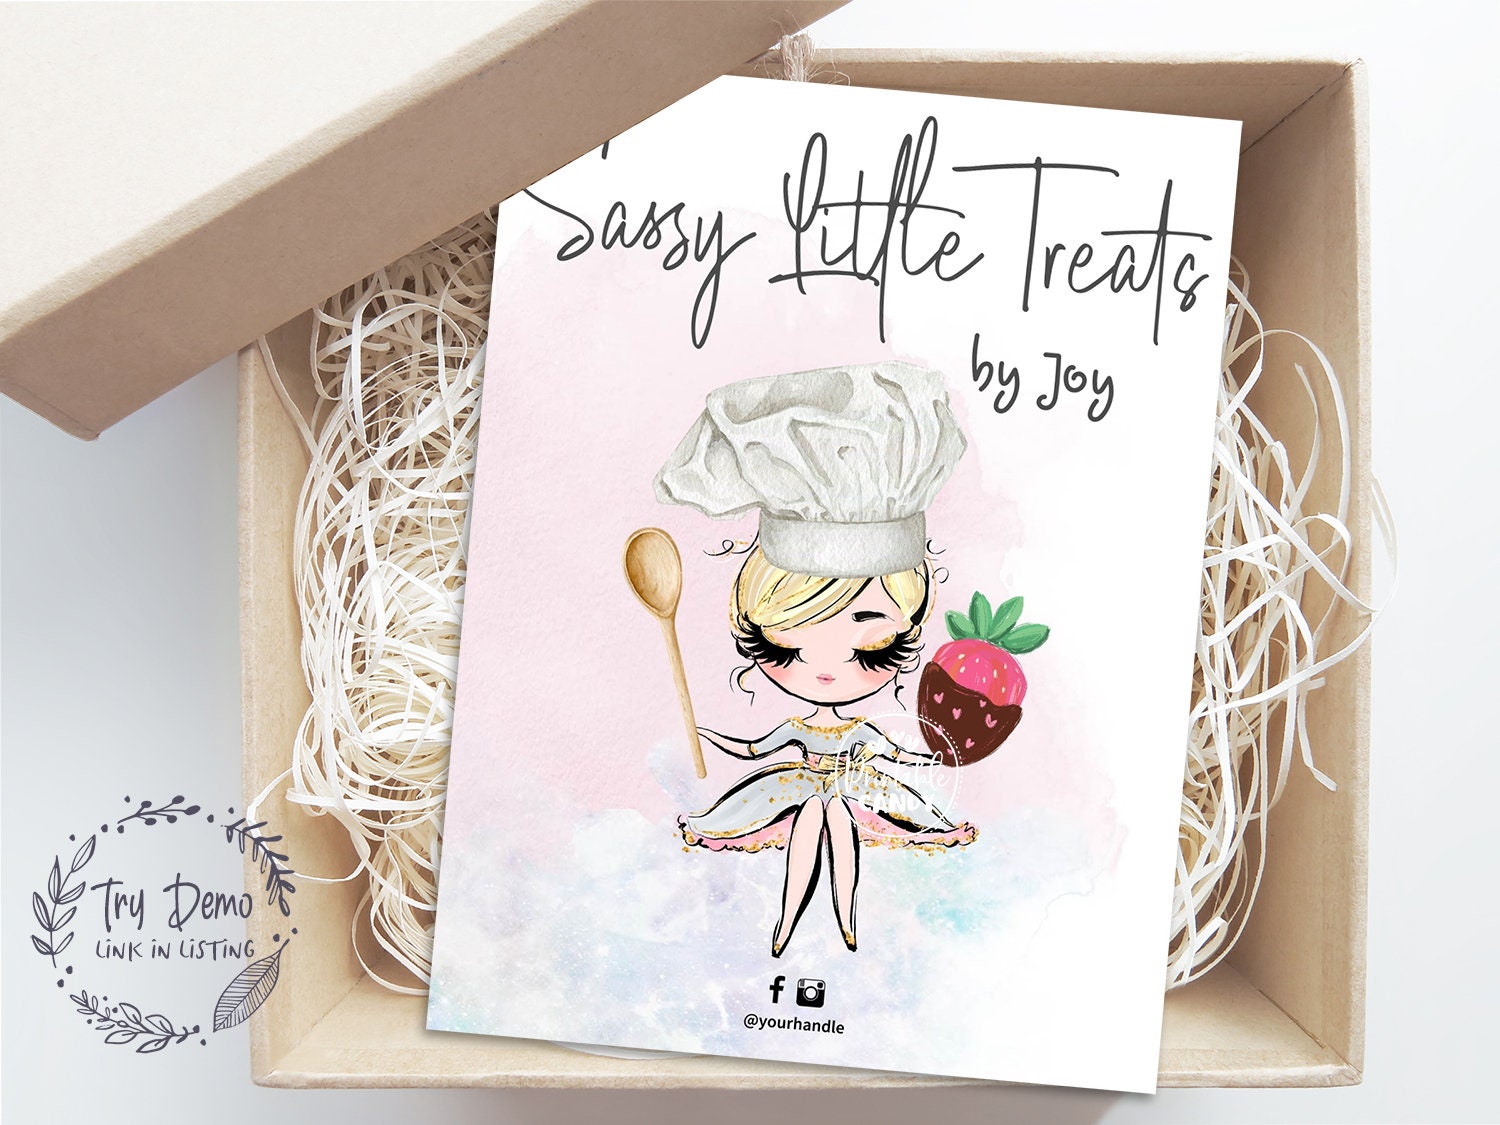 bakery story 2 thank you notes